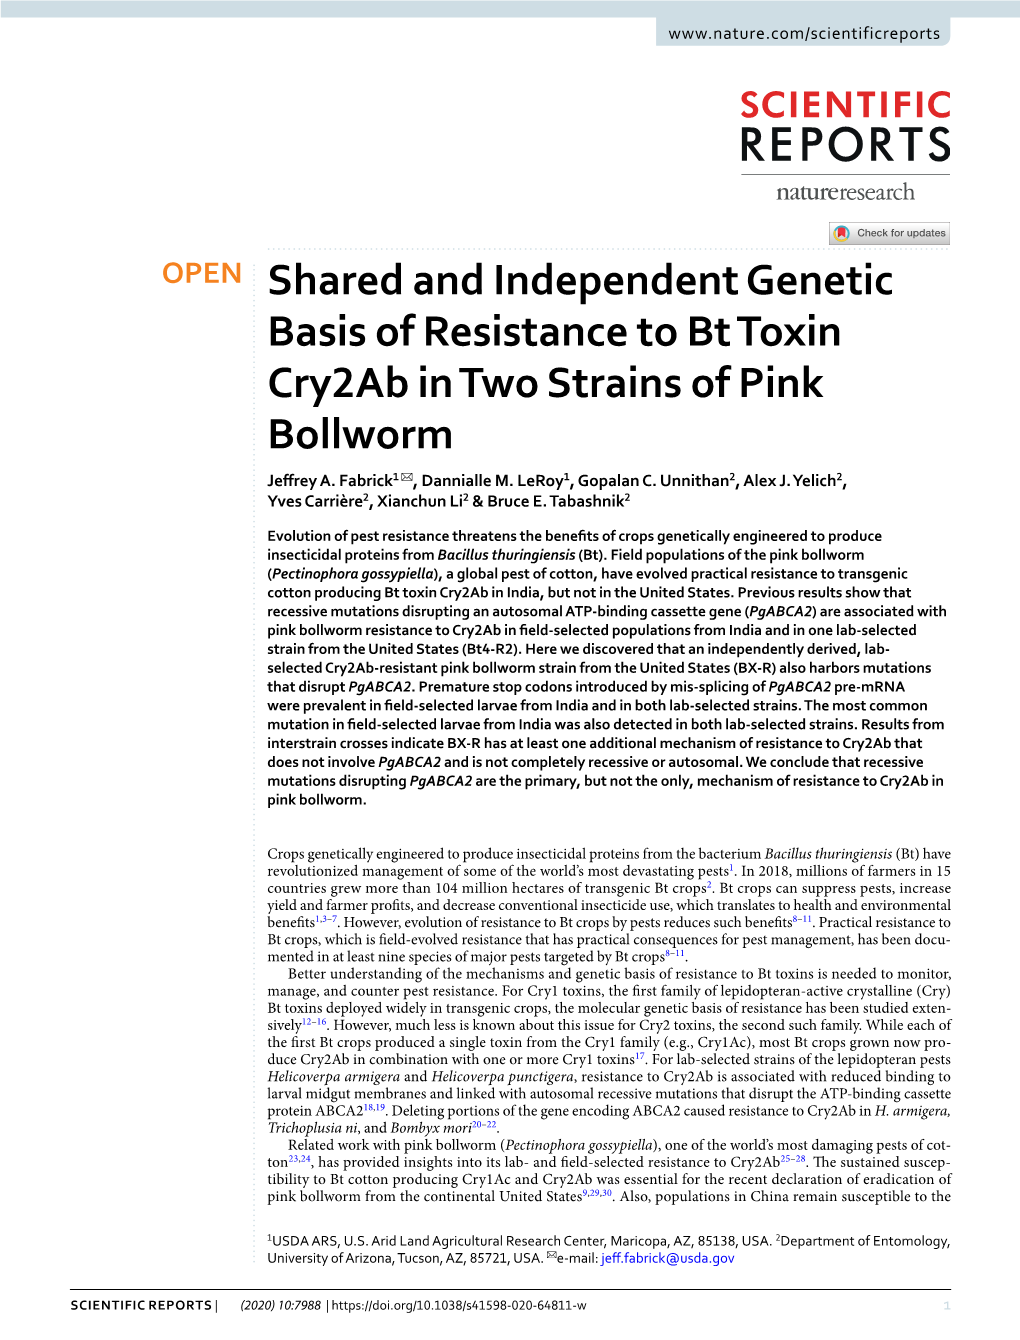 Shared and Independent Genetic Basis of Resistance to Bt Toxin Cry2ab in Two Strains of Pink Bollworm Jefrey A